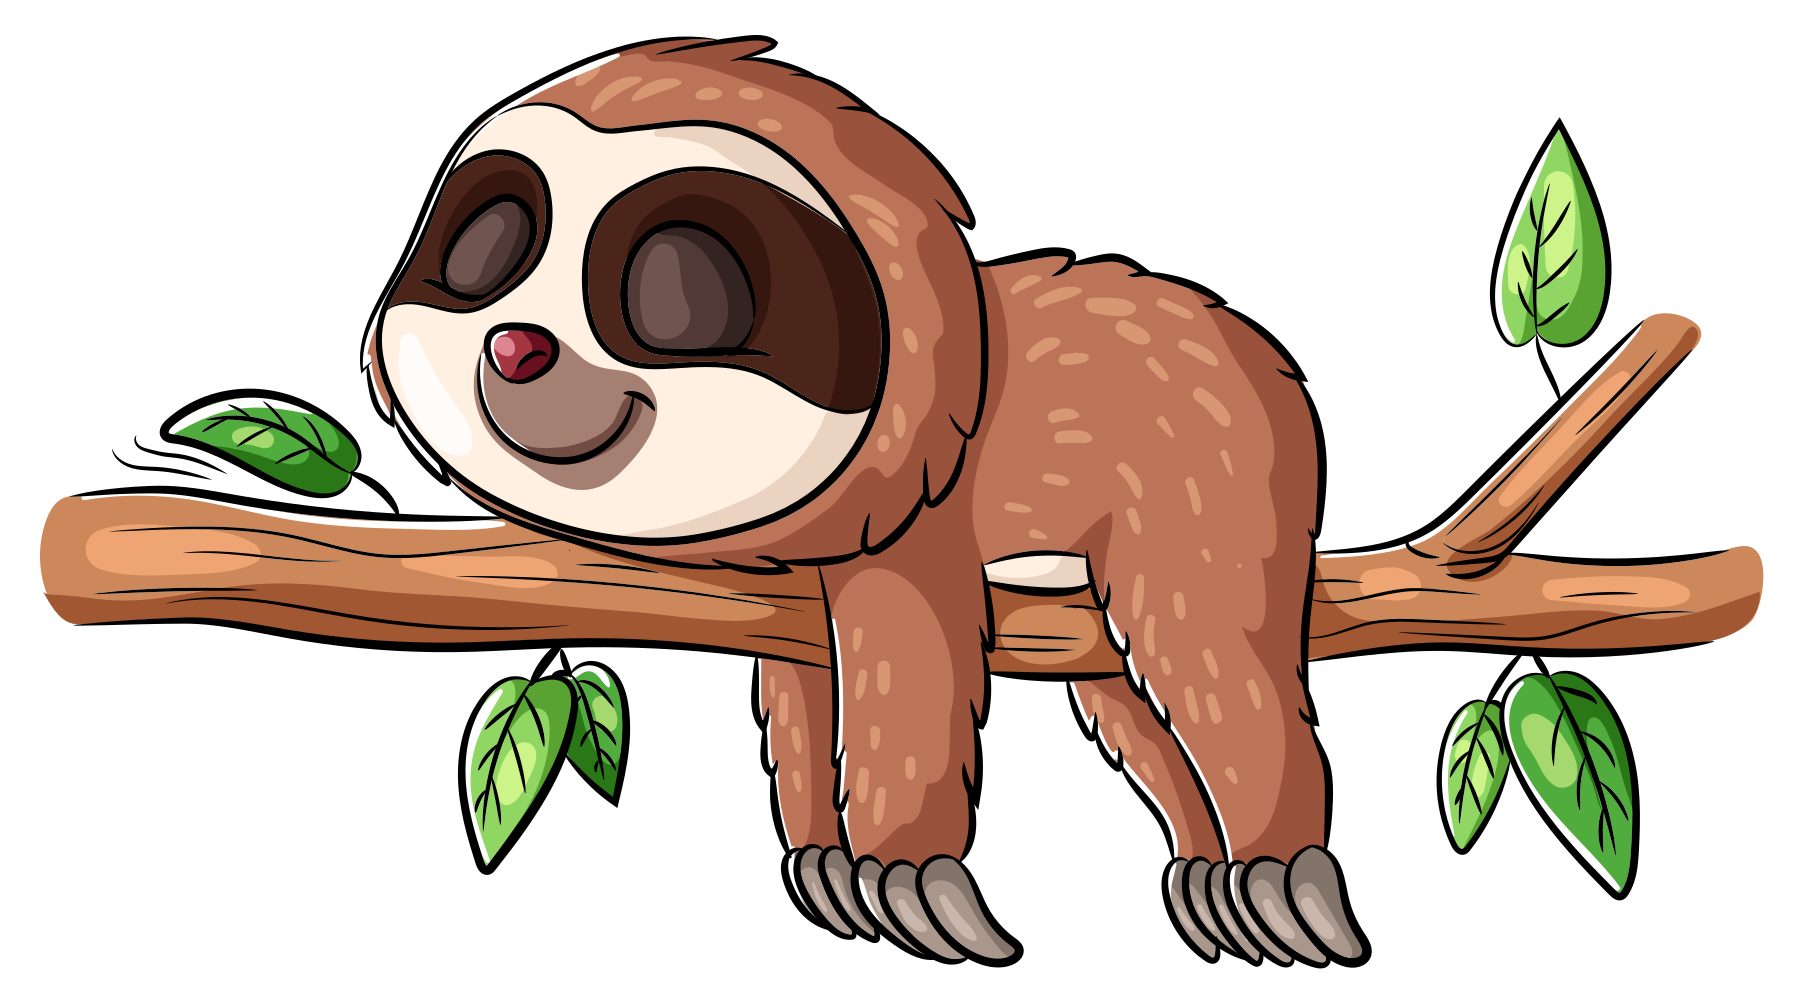 Adverbs in Spanish - Sloth